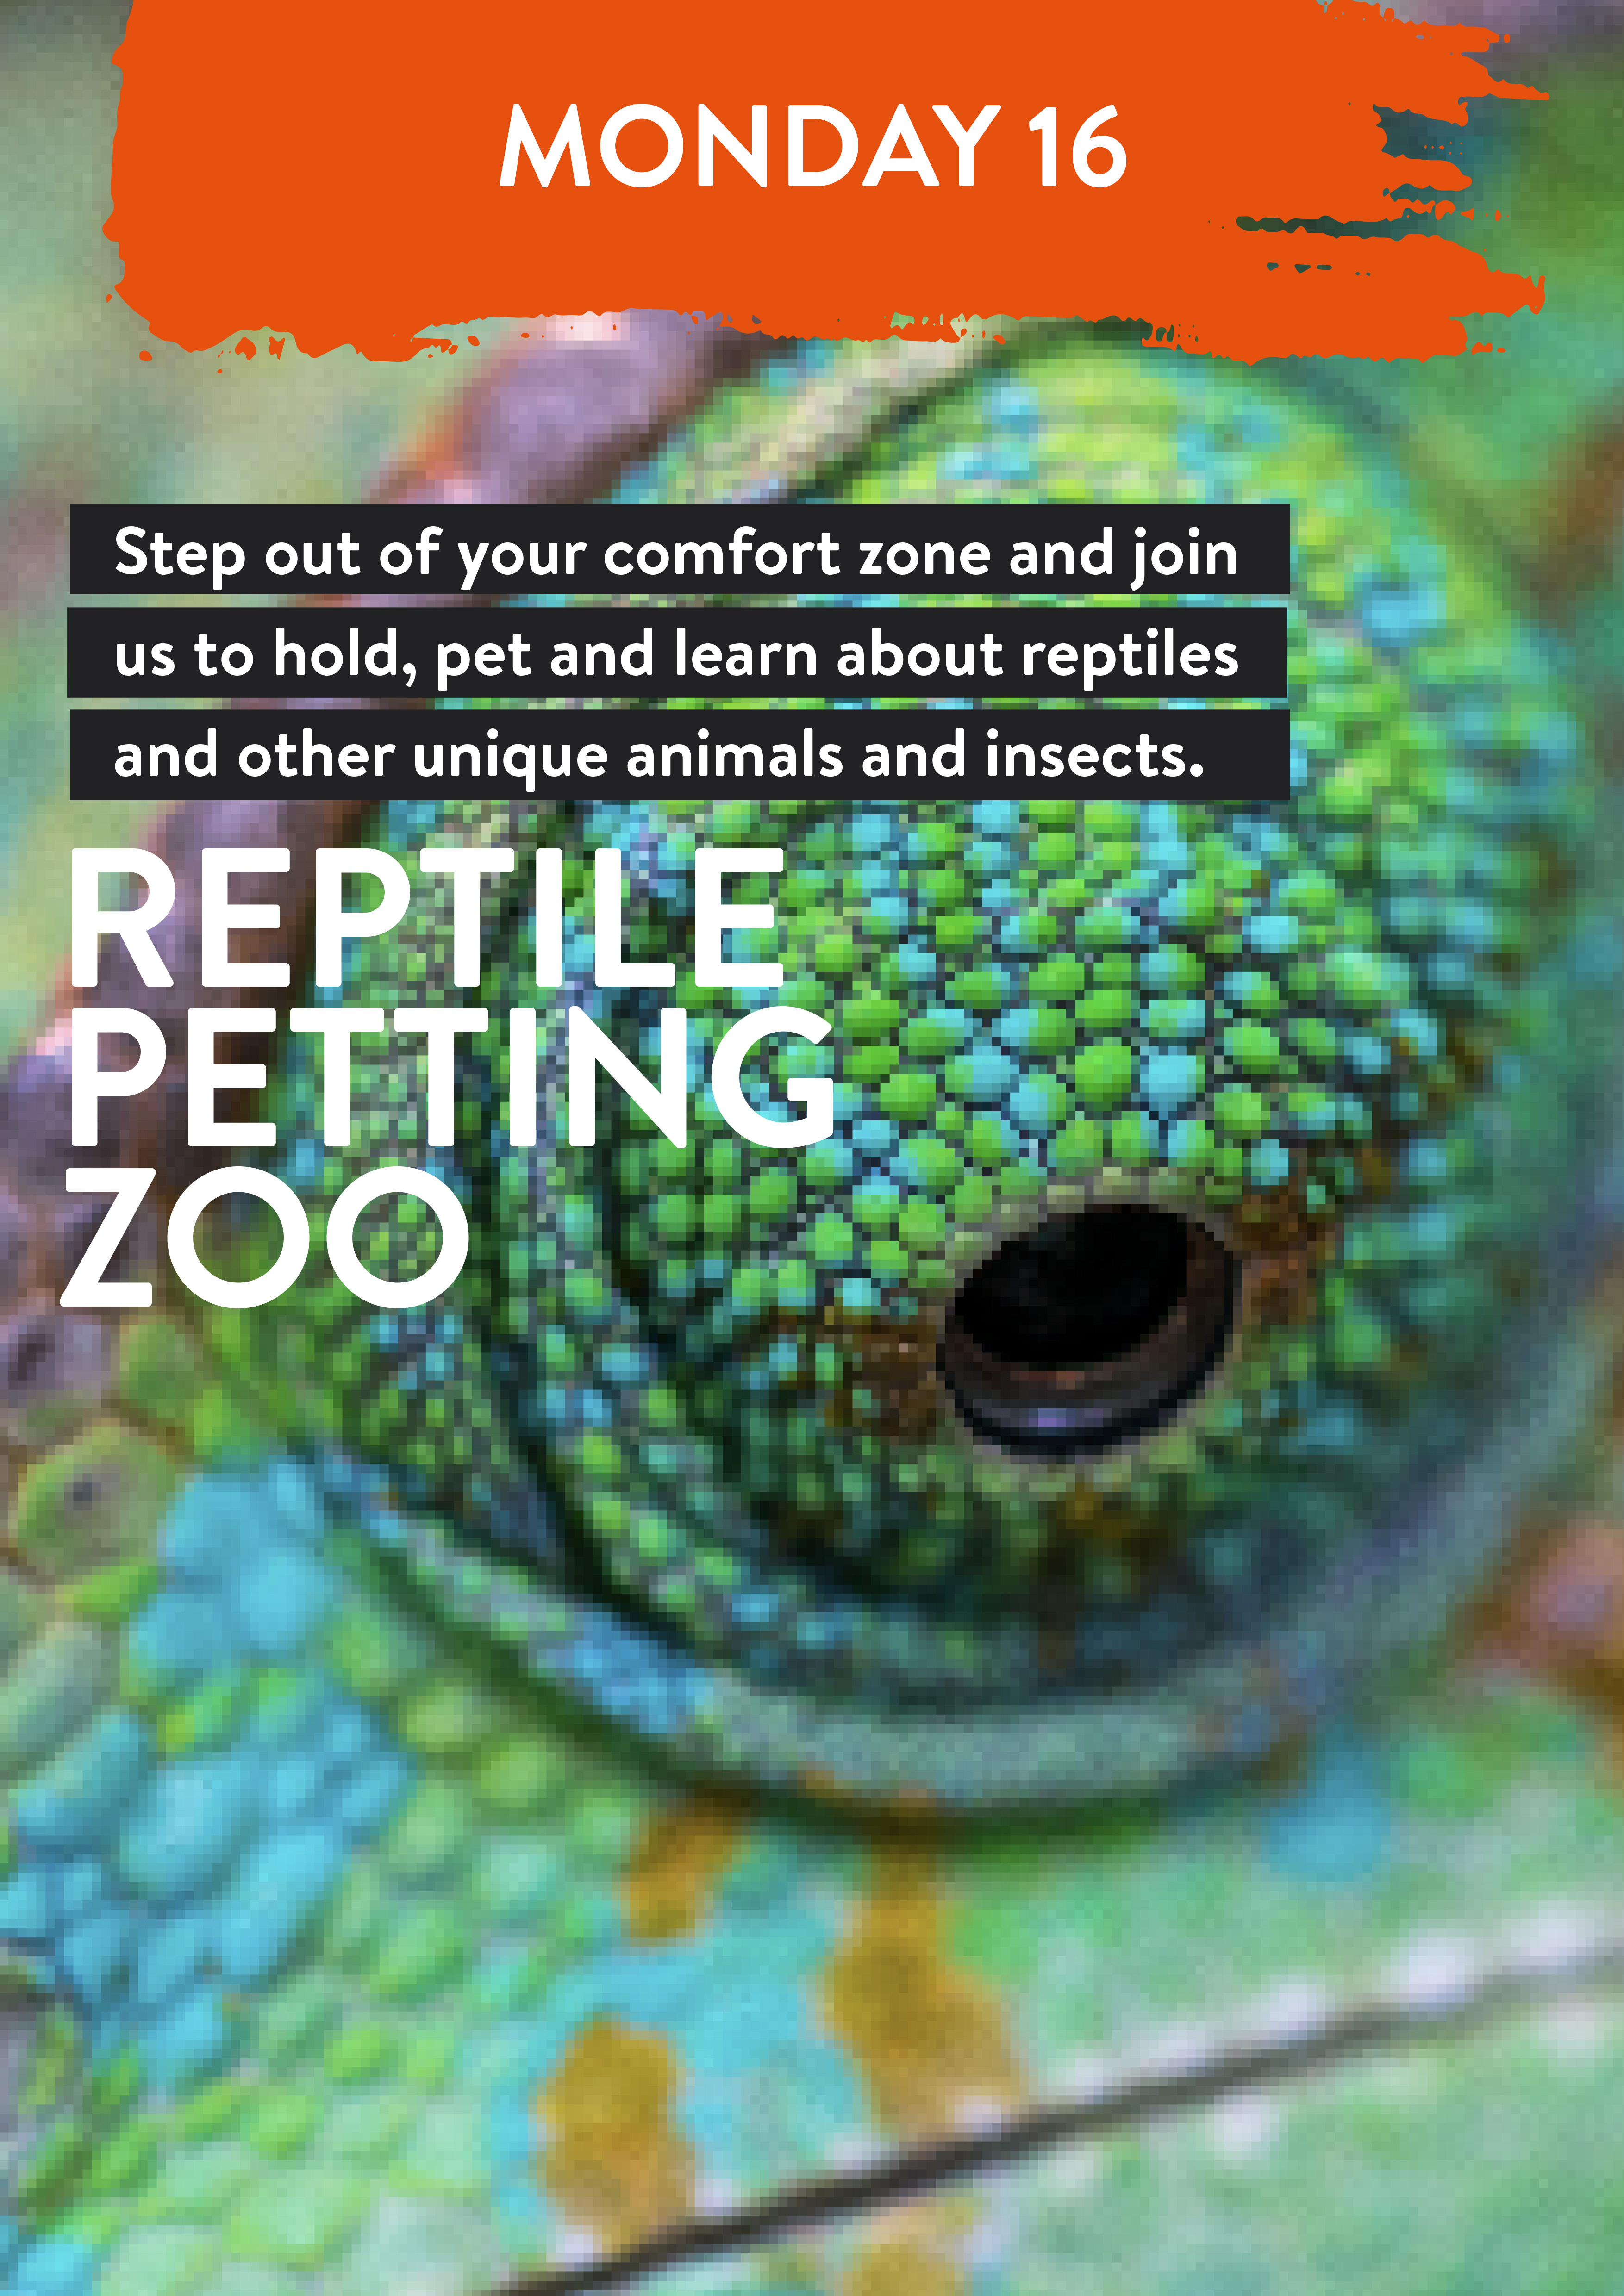 Monday 16 January. Reptile Petting Zoo. Step out of your comfort zone and join us to hold, pet and learn about reptiles and other unique animals and insects.